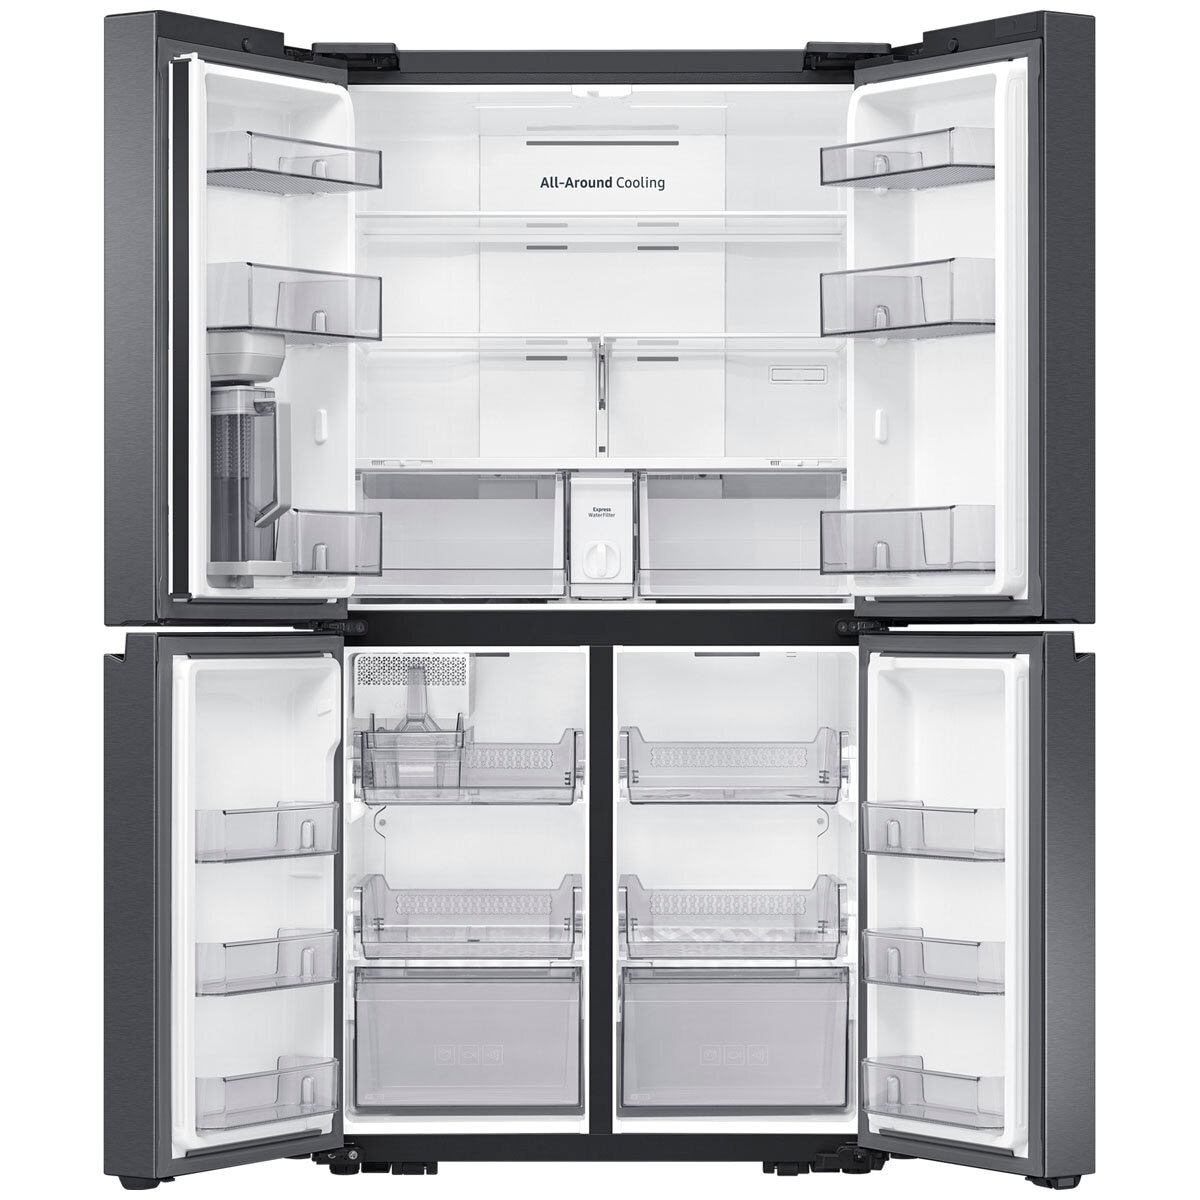 Samsung 640L Family Hub French Door Refrigerator Stainless Steel SRF7900BFH